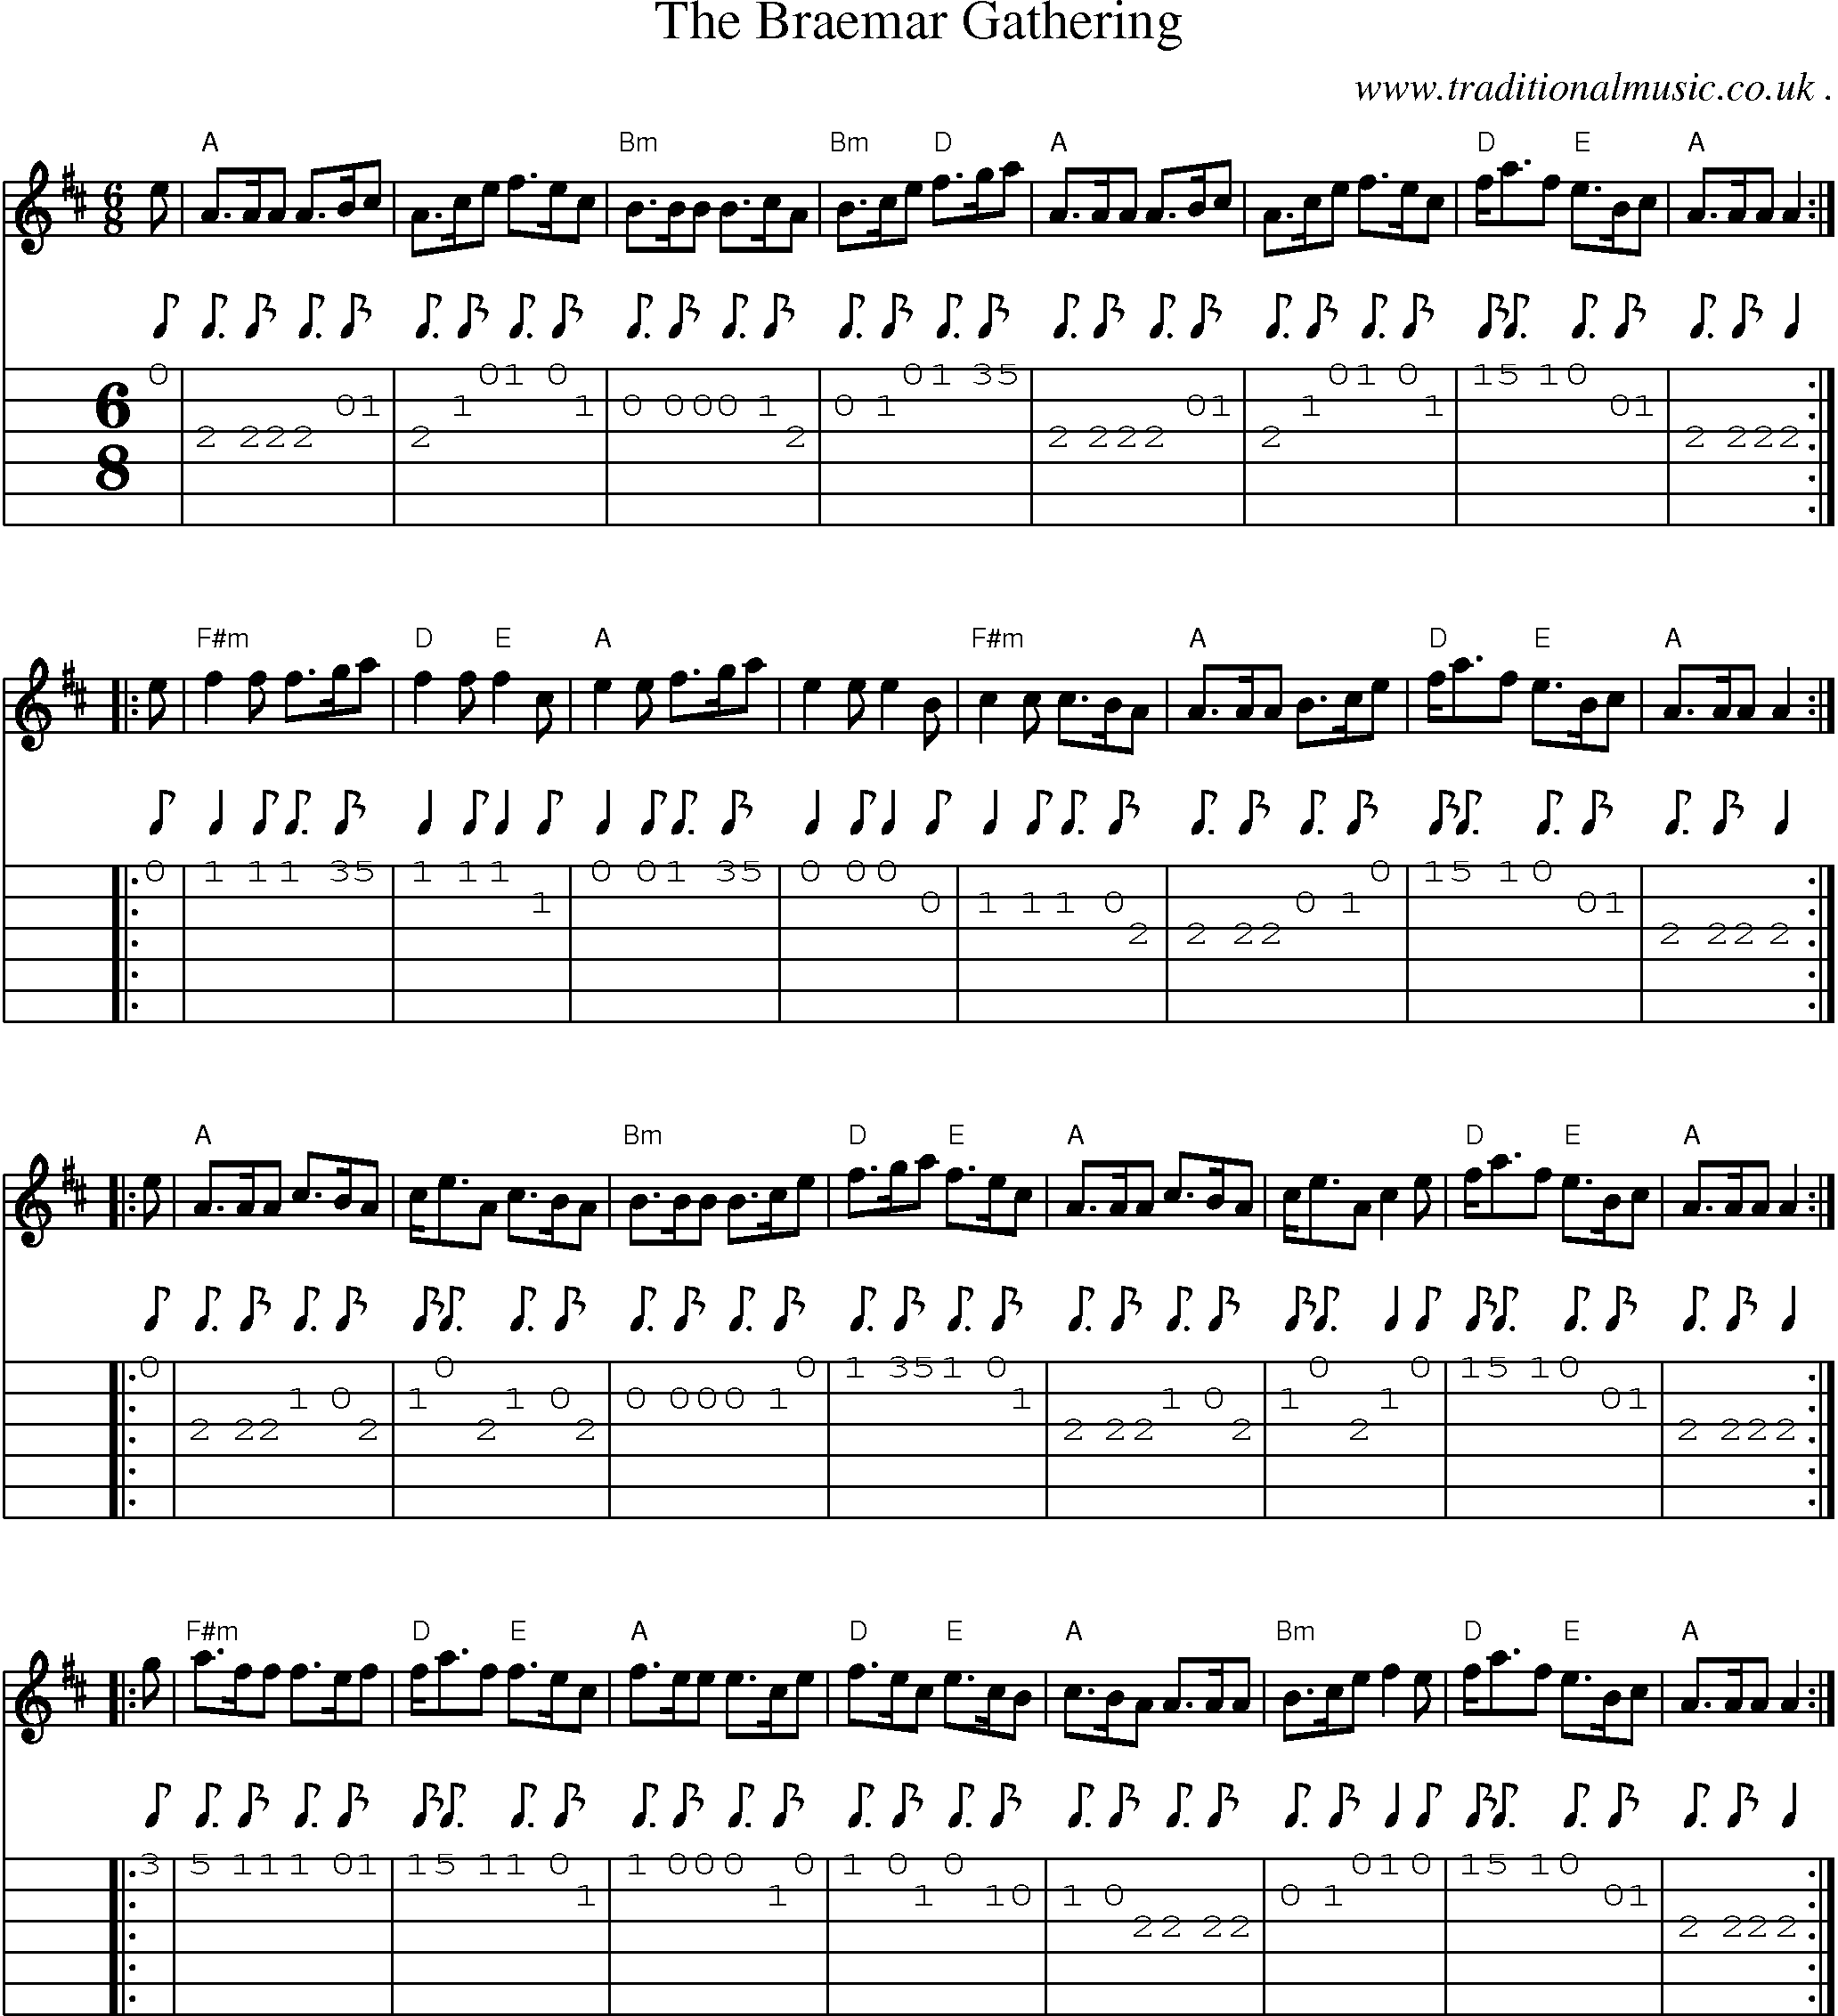 Sheet-music  score, Chords and Guitar Tabs for The Braemar Gathering